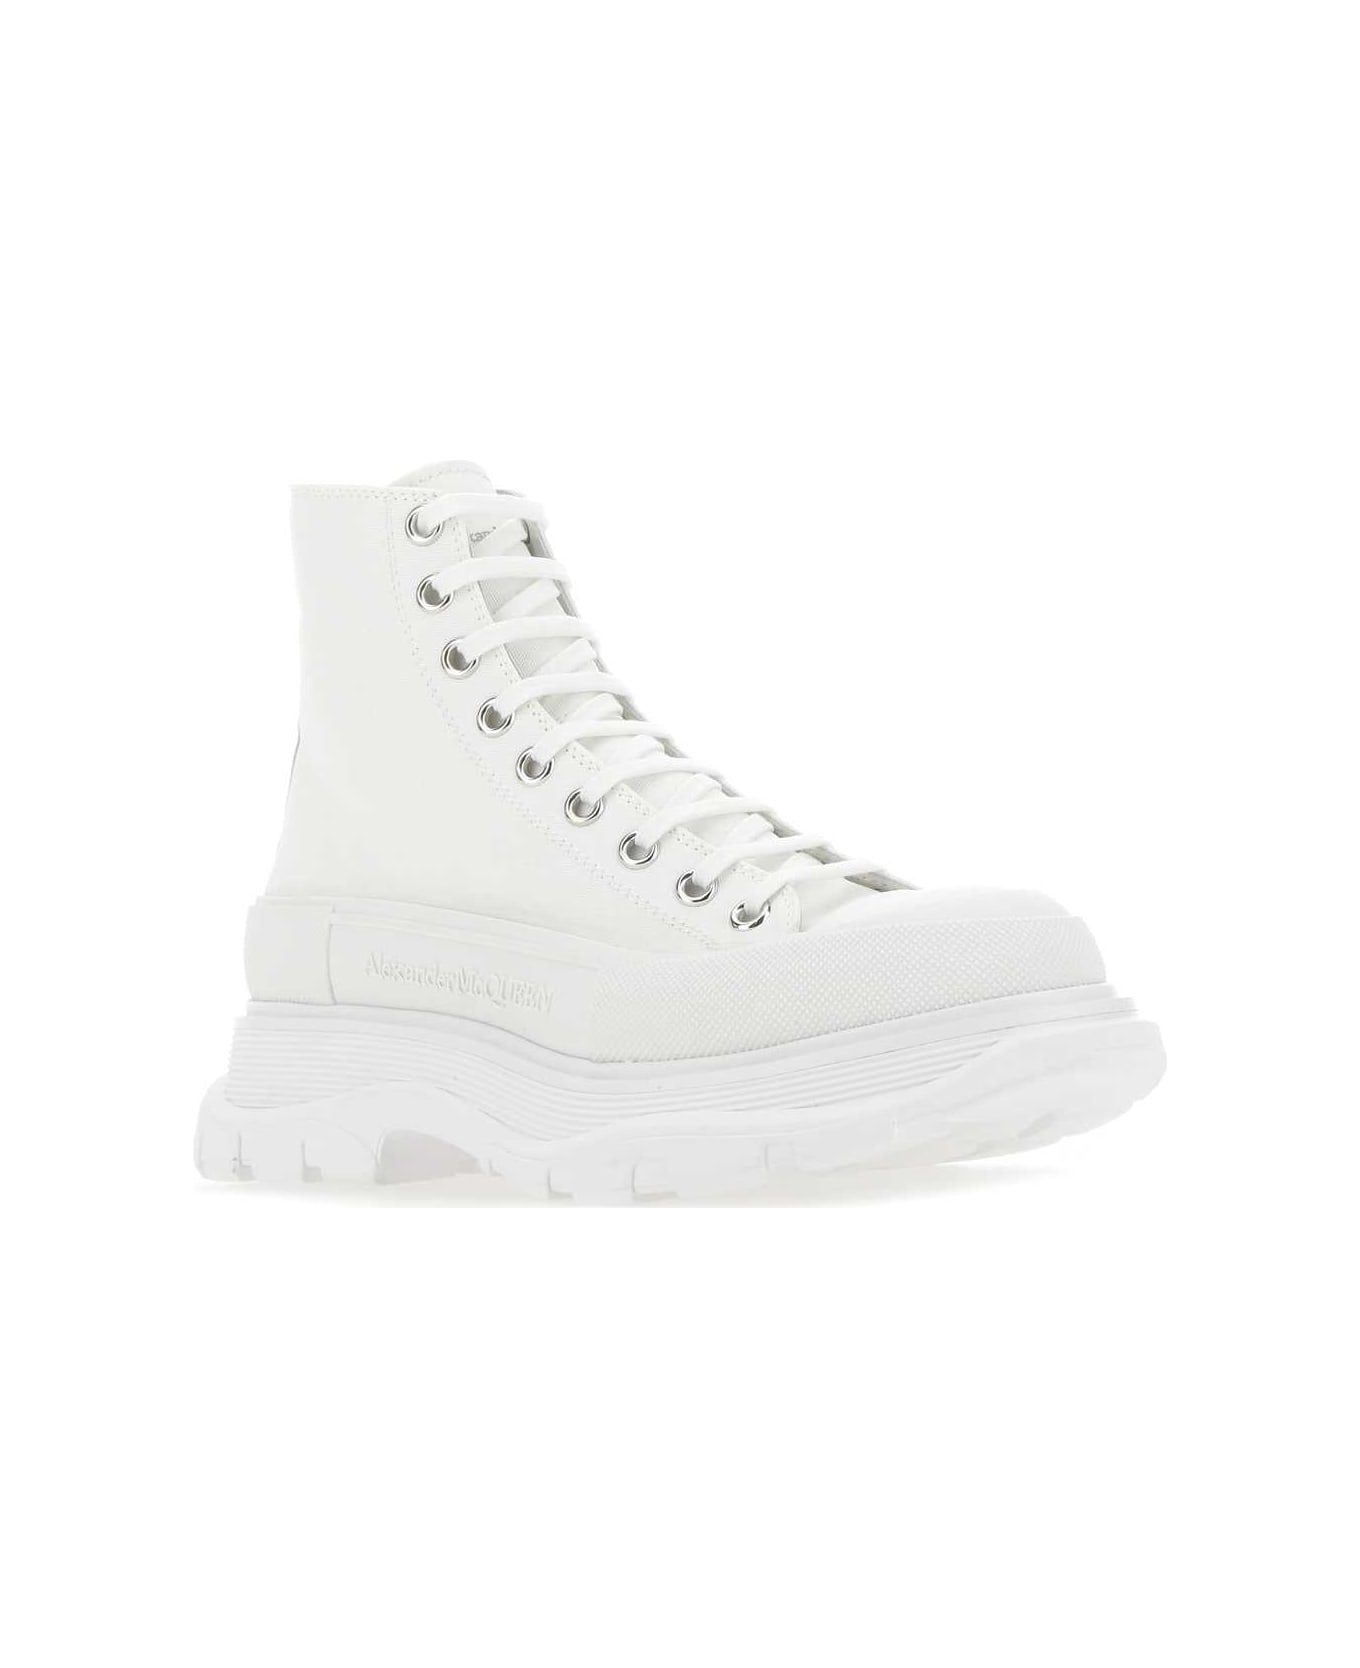 Alexander McQueen White Canvas And Rubber Tread Slick Sneakers - 9000